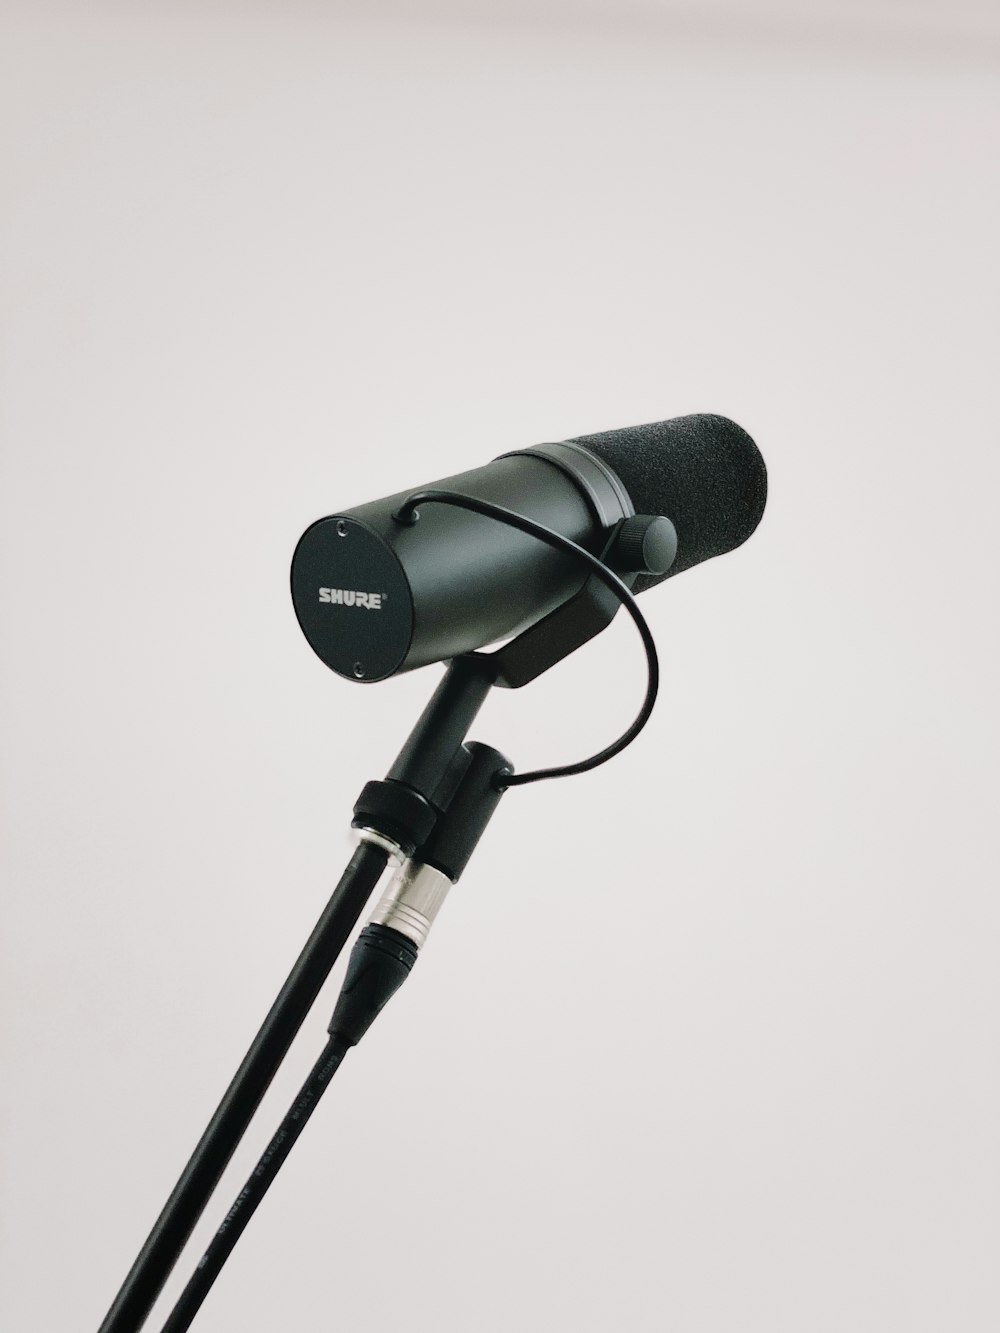 black microphone with stand on white background